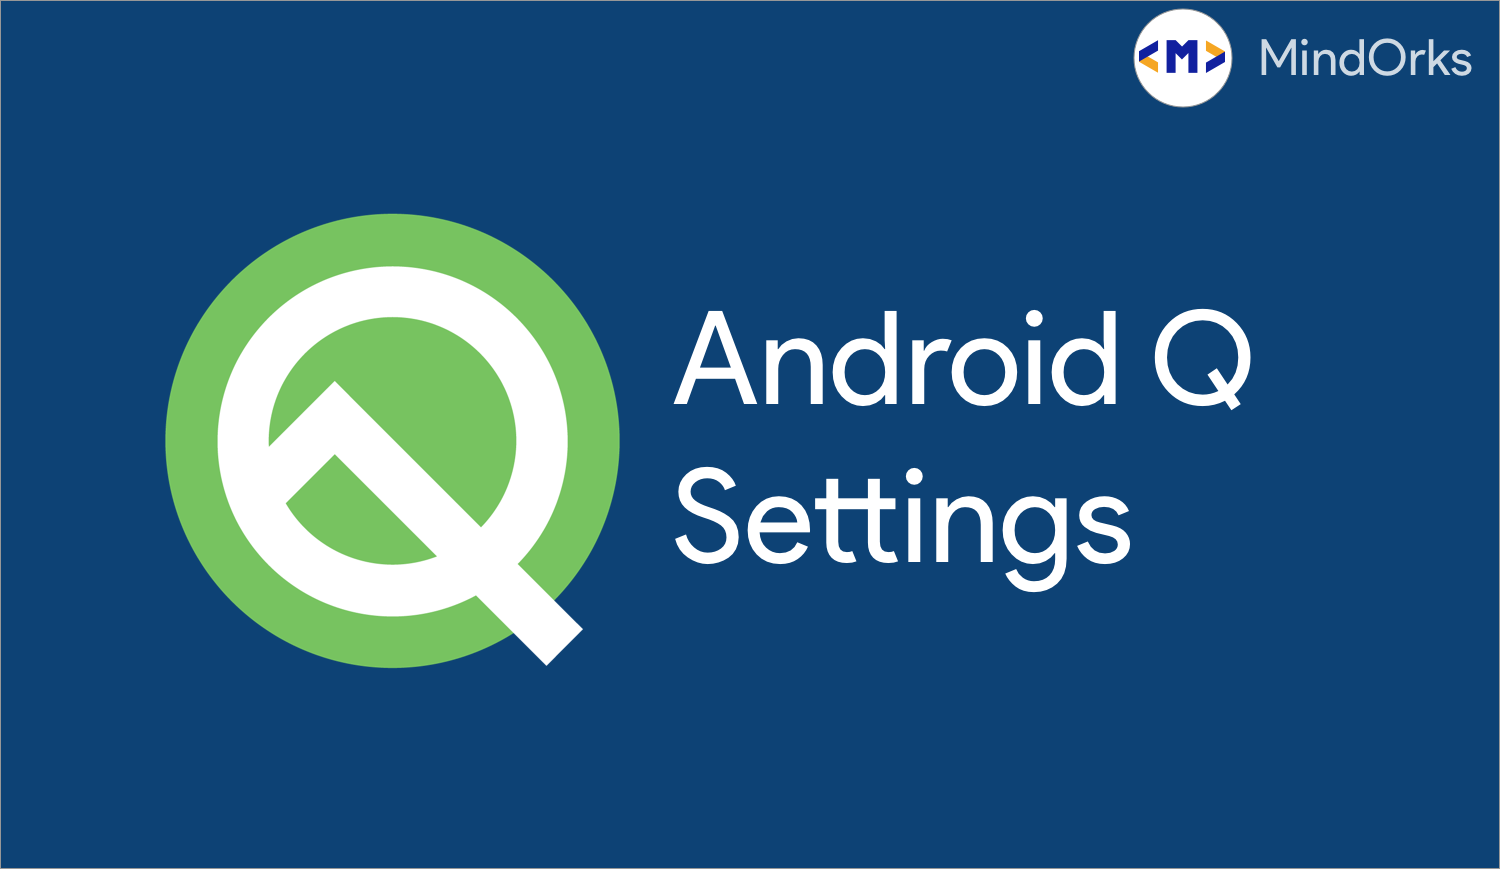 Understanding Settings Panels in Android Q